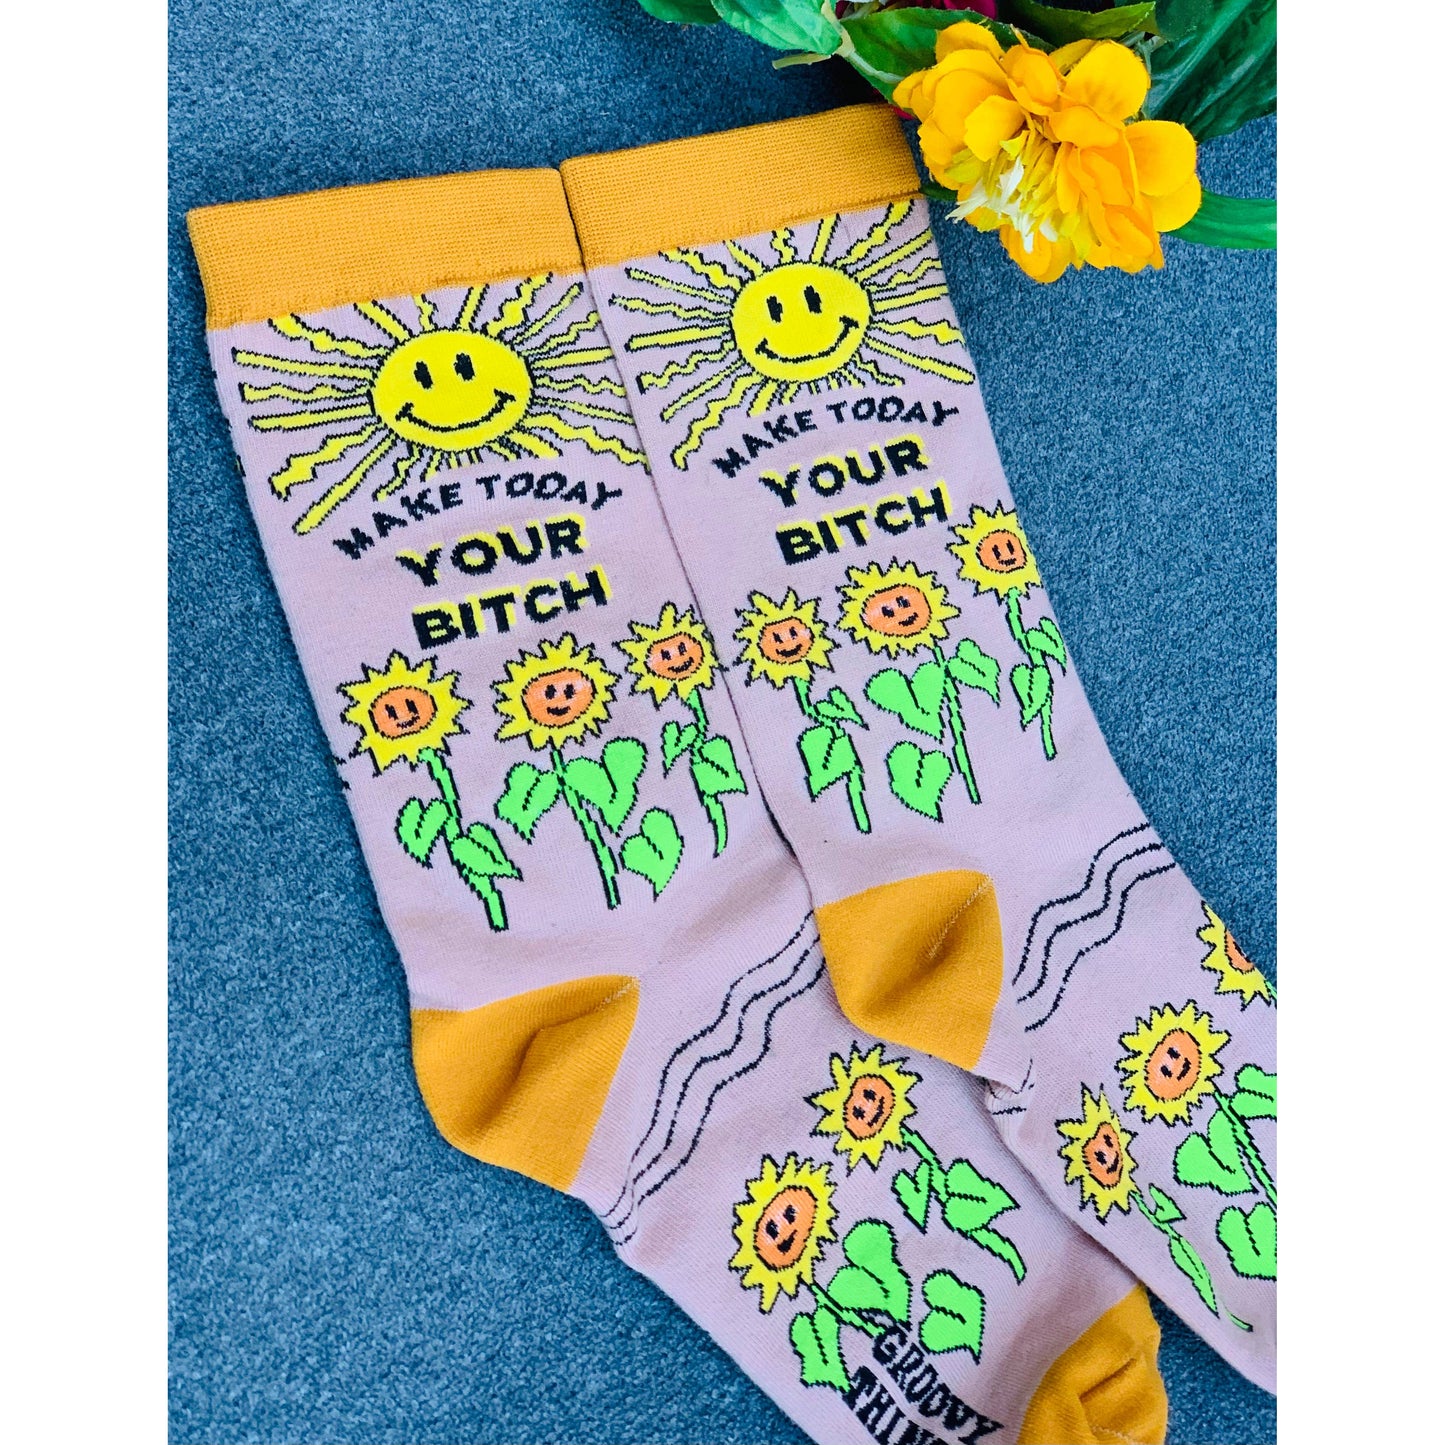 Make Today Your Bitch Crew Socks in Cheerful Yellow